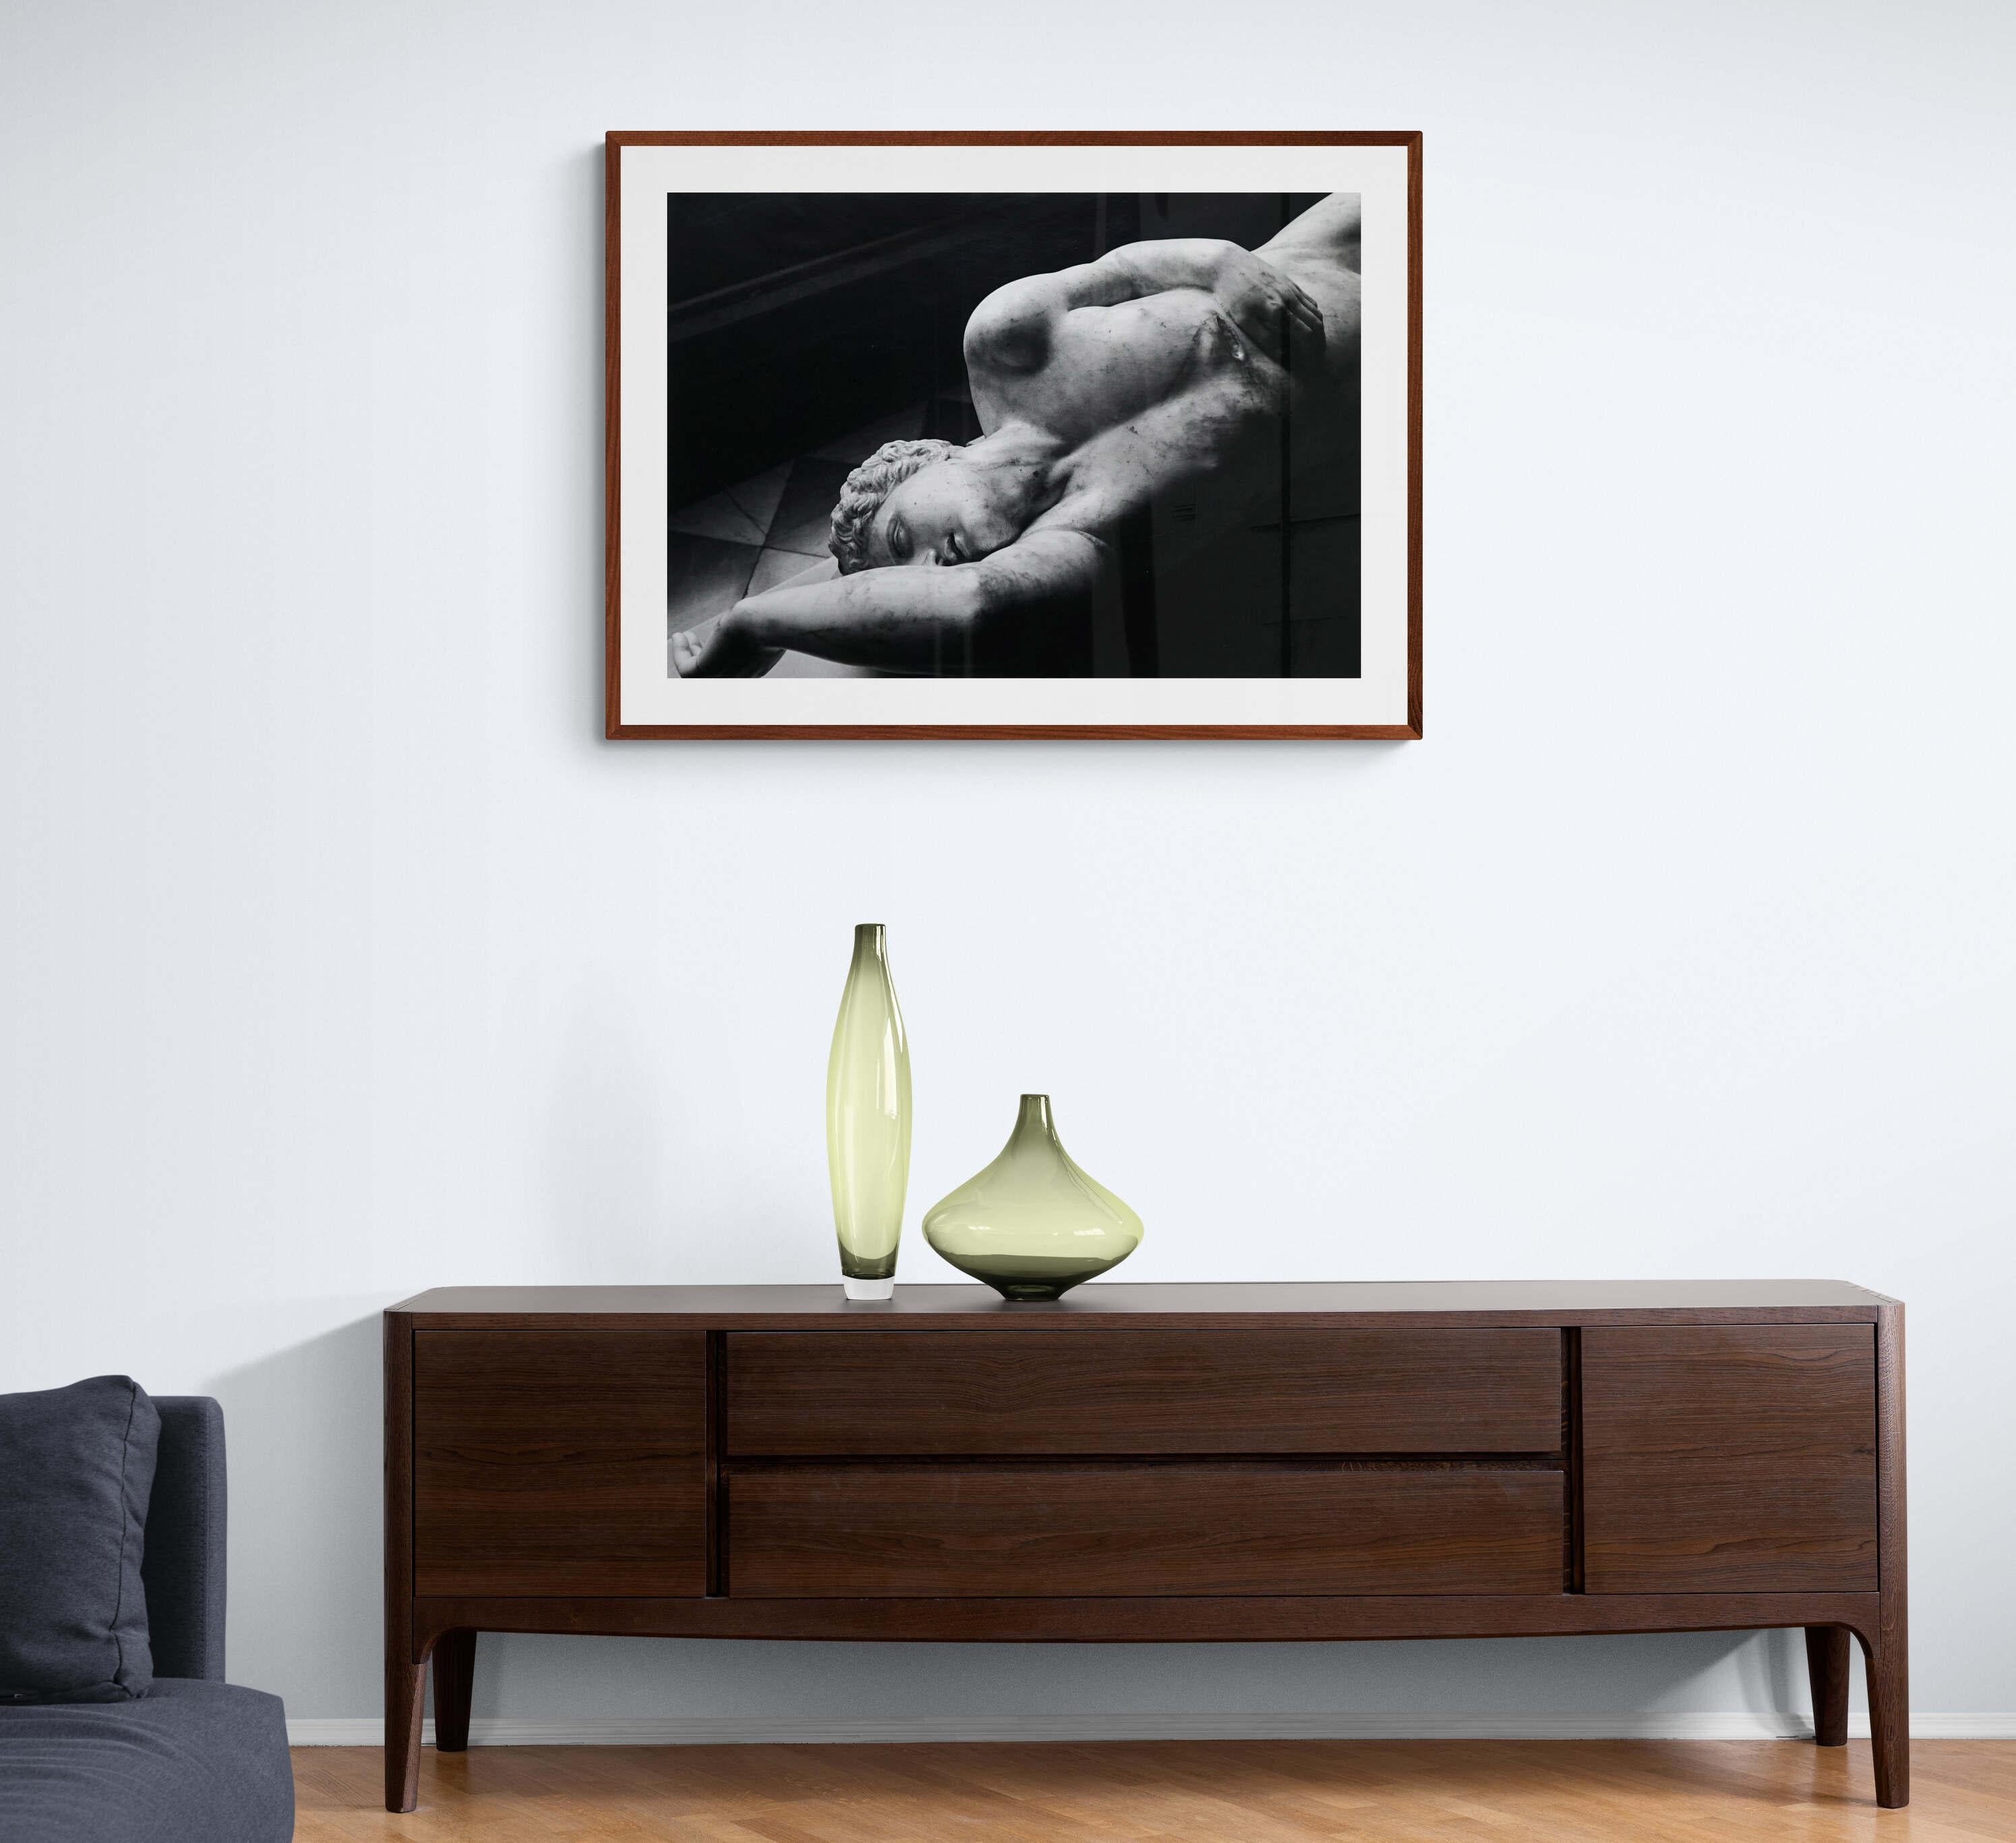 Statuary - Off-Print # 2 - 1976 - Minimalist Black & White Photography For Sale 4